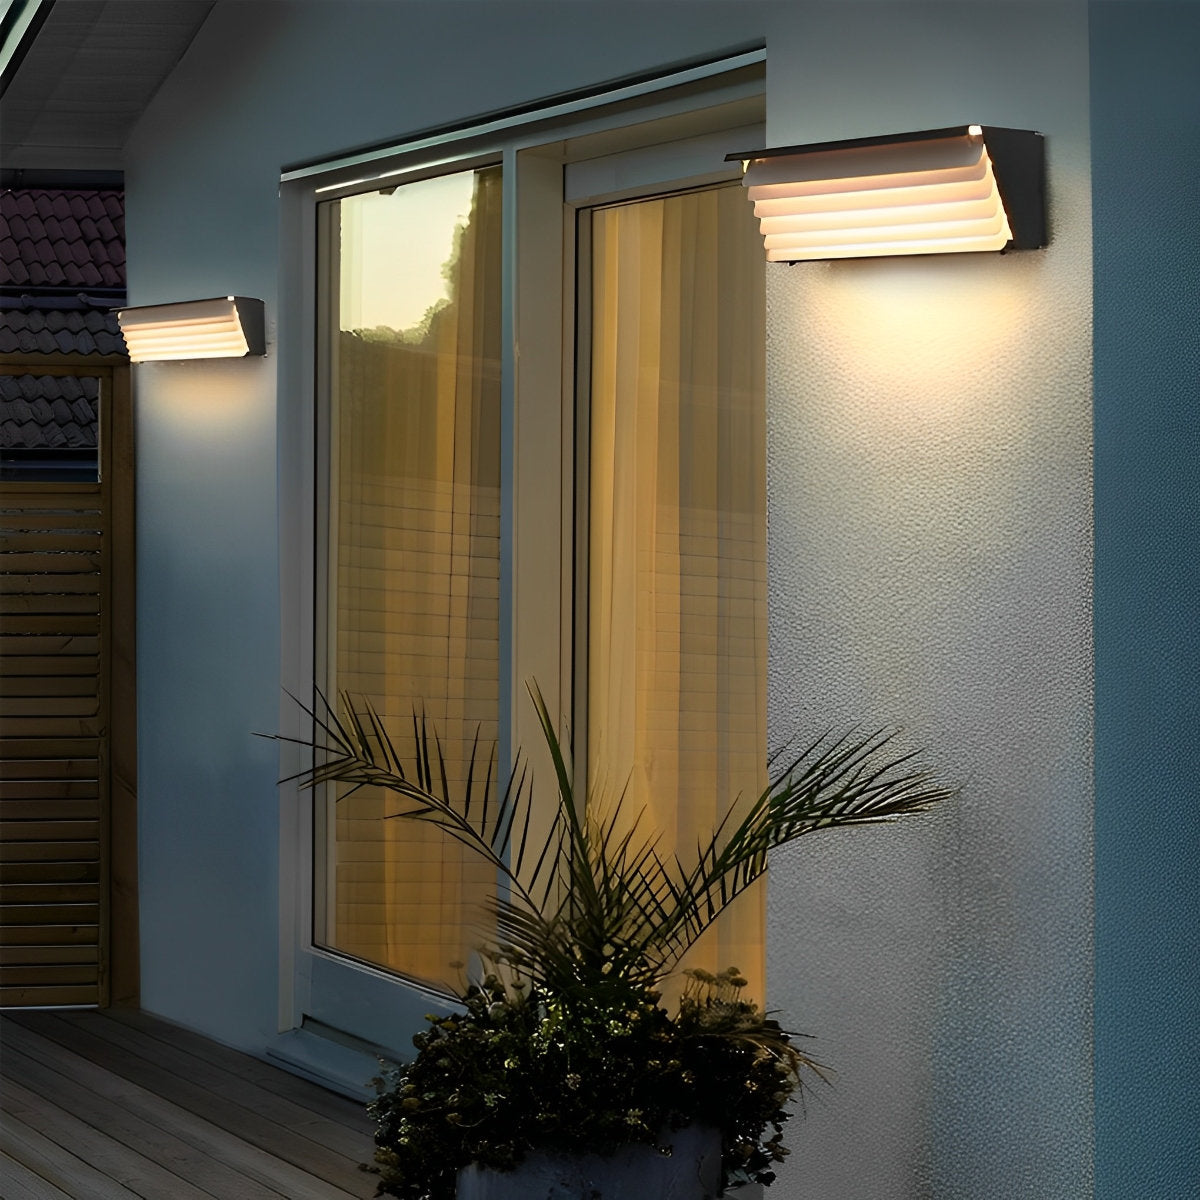 Creative Waterproof LED Modern Outdoor Wall Lamp Wall Sconce Lighting - Flyachilles